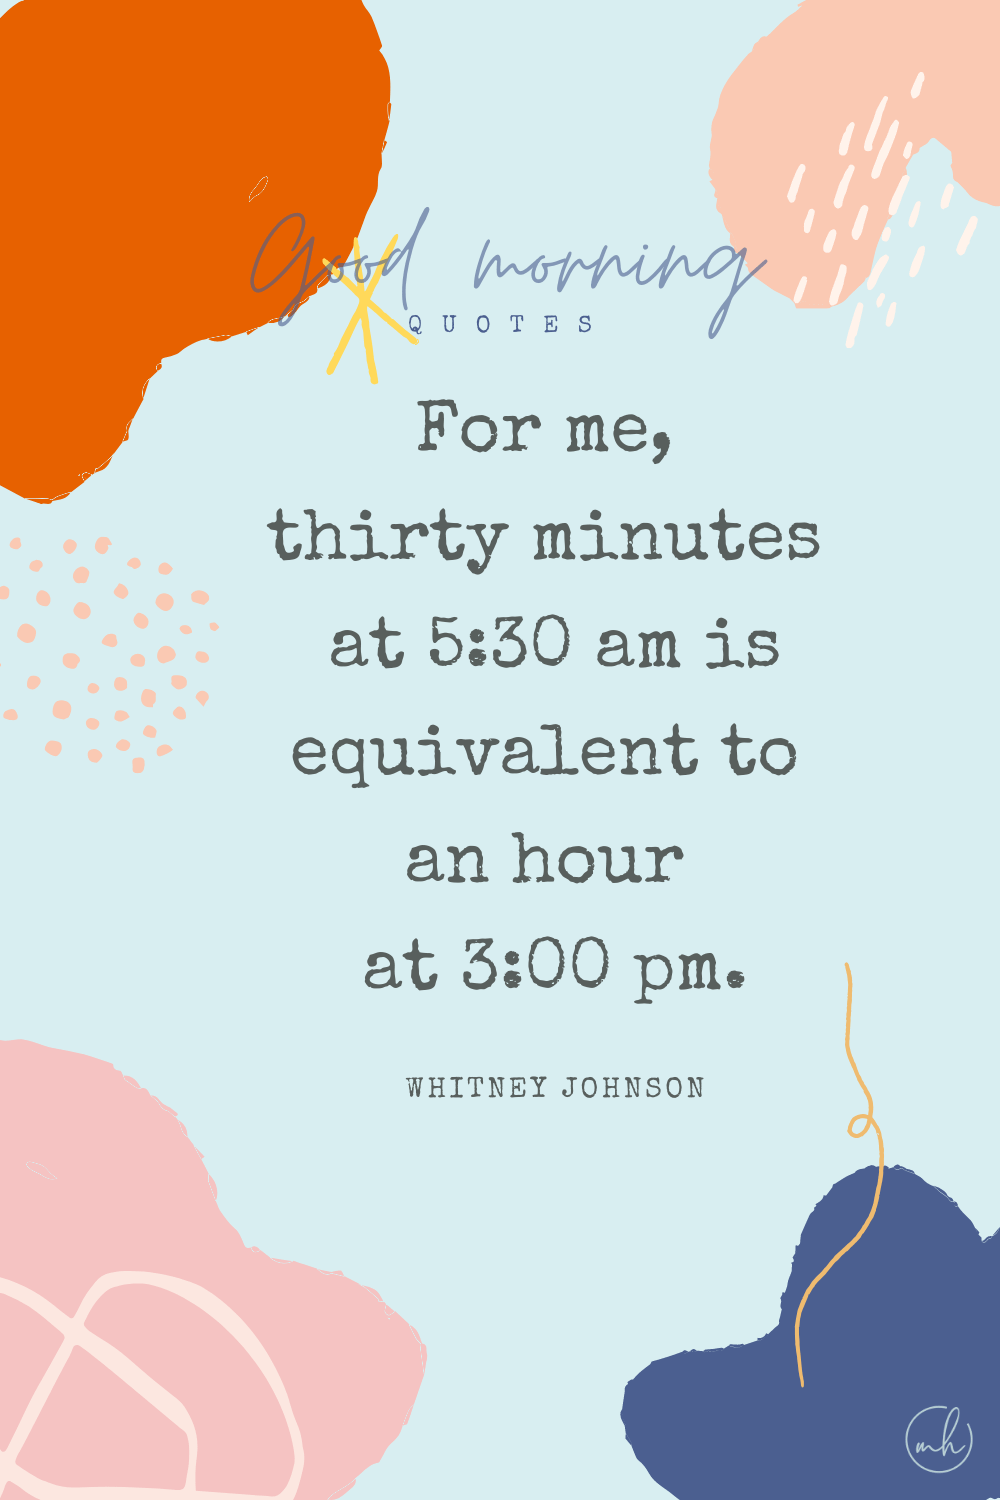 "Mornings are so precious because it’s when I’m most productive. For me, thirty minutes at 5:30 am is equivalent to at least an hour at 3:00 pm." – Whitney Johnson